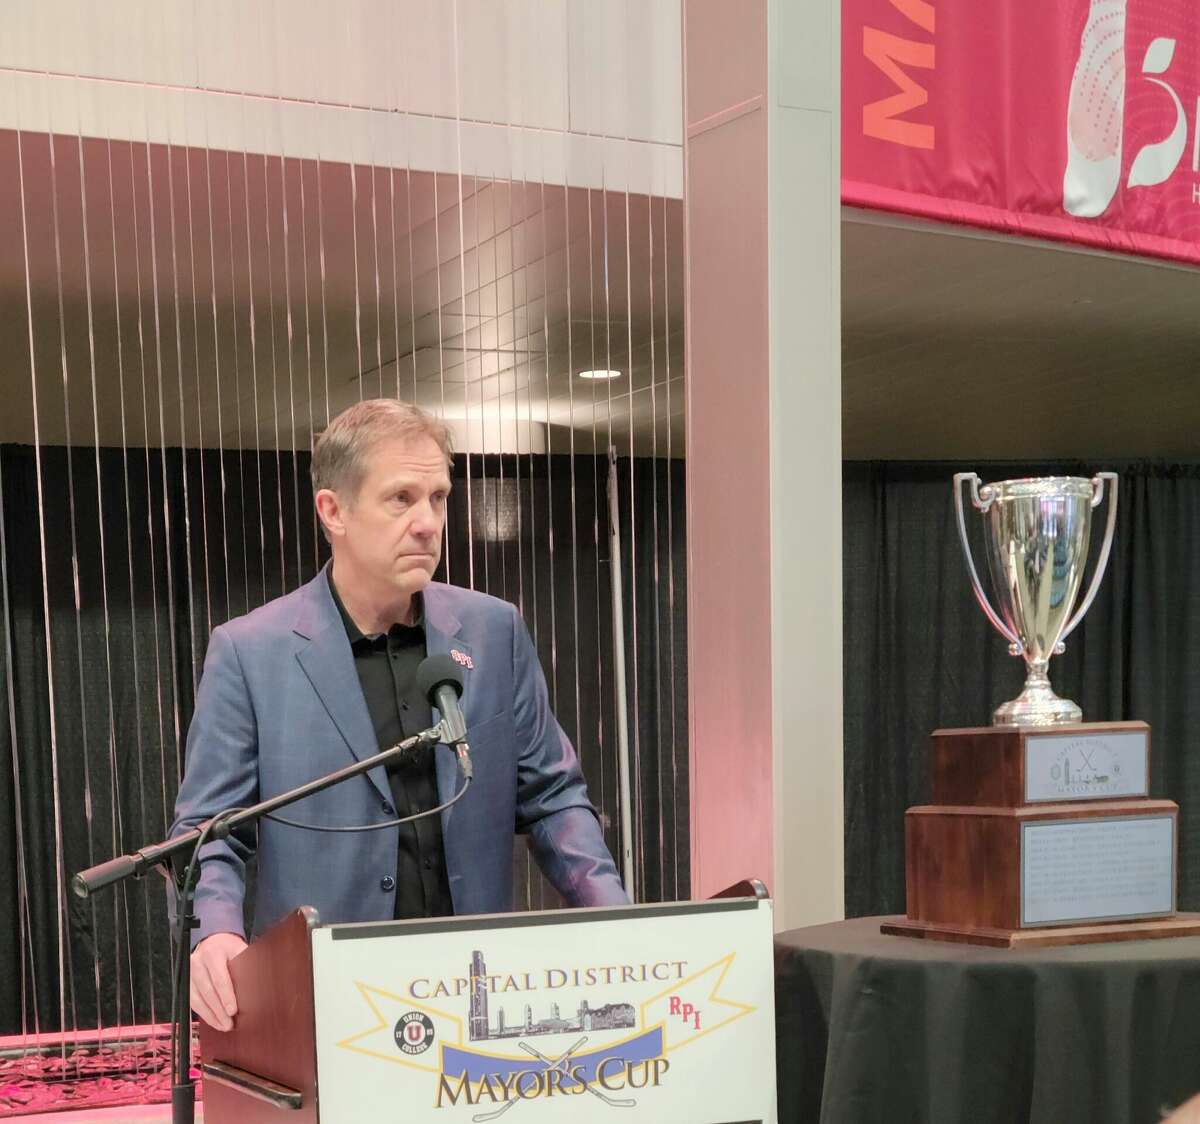 RPI hockey coach Dave Smith said his team has to recall what it has learned from other big games this season as it goes into the final weekend of the regular season.